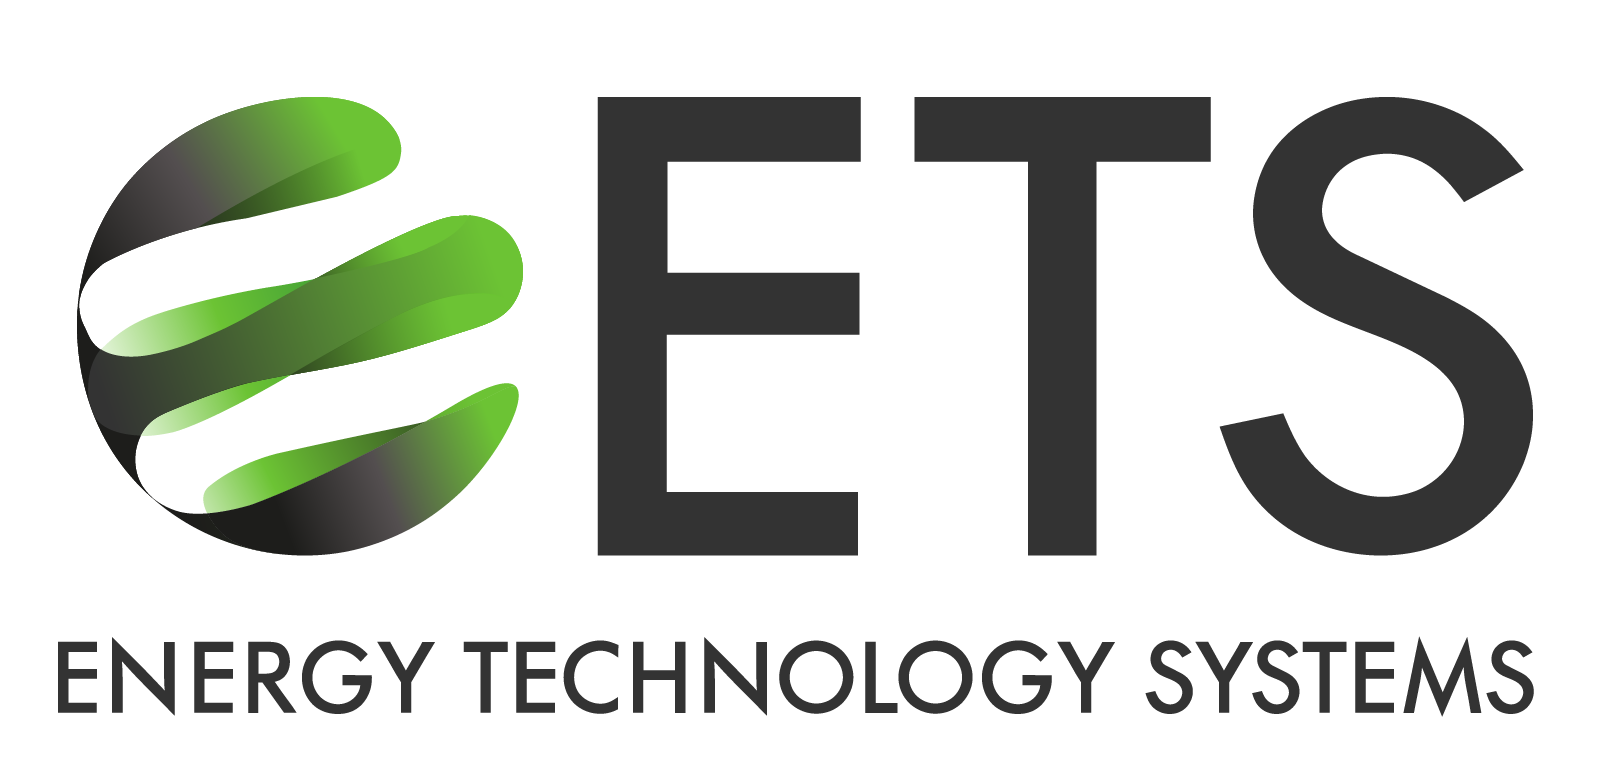 ETS ENERGY TECHNOLOGY SYSTEMS 